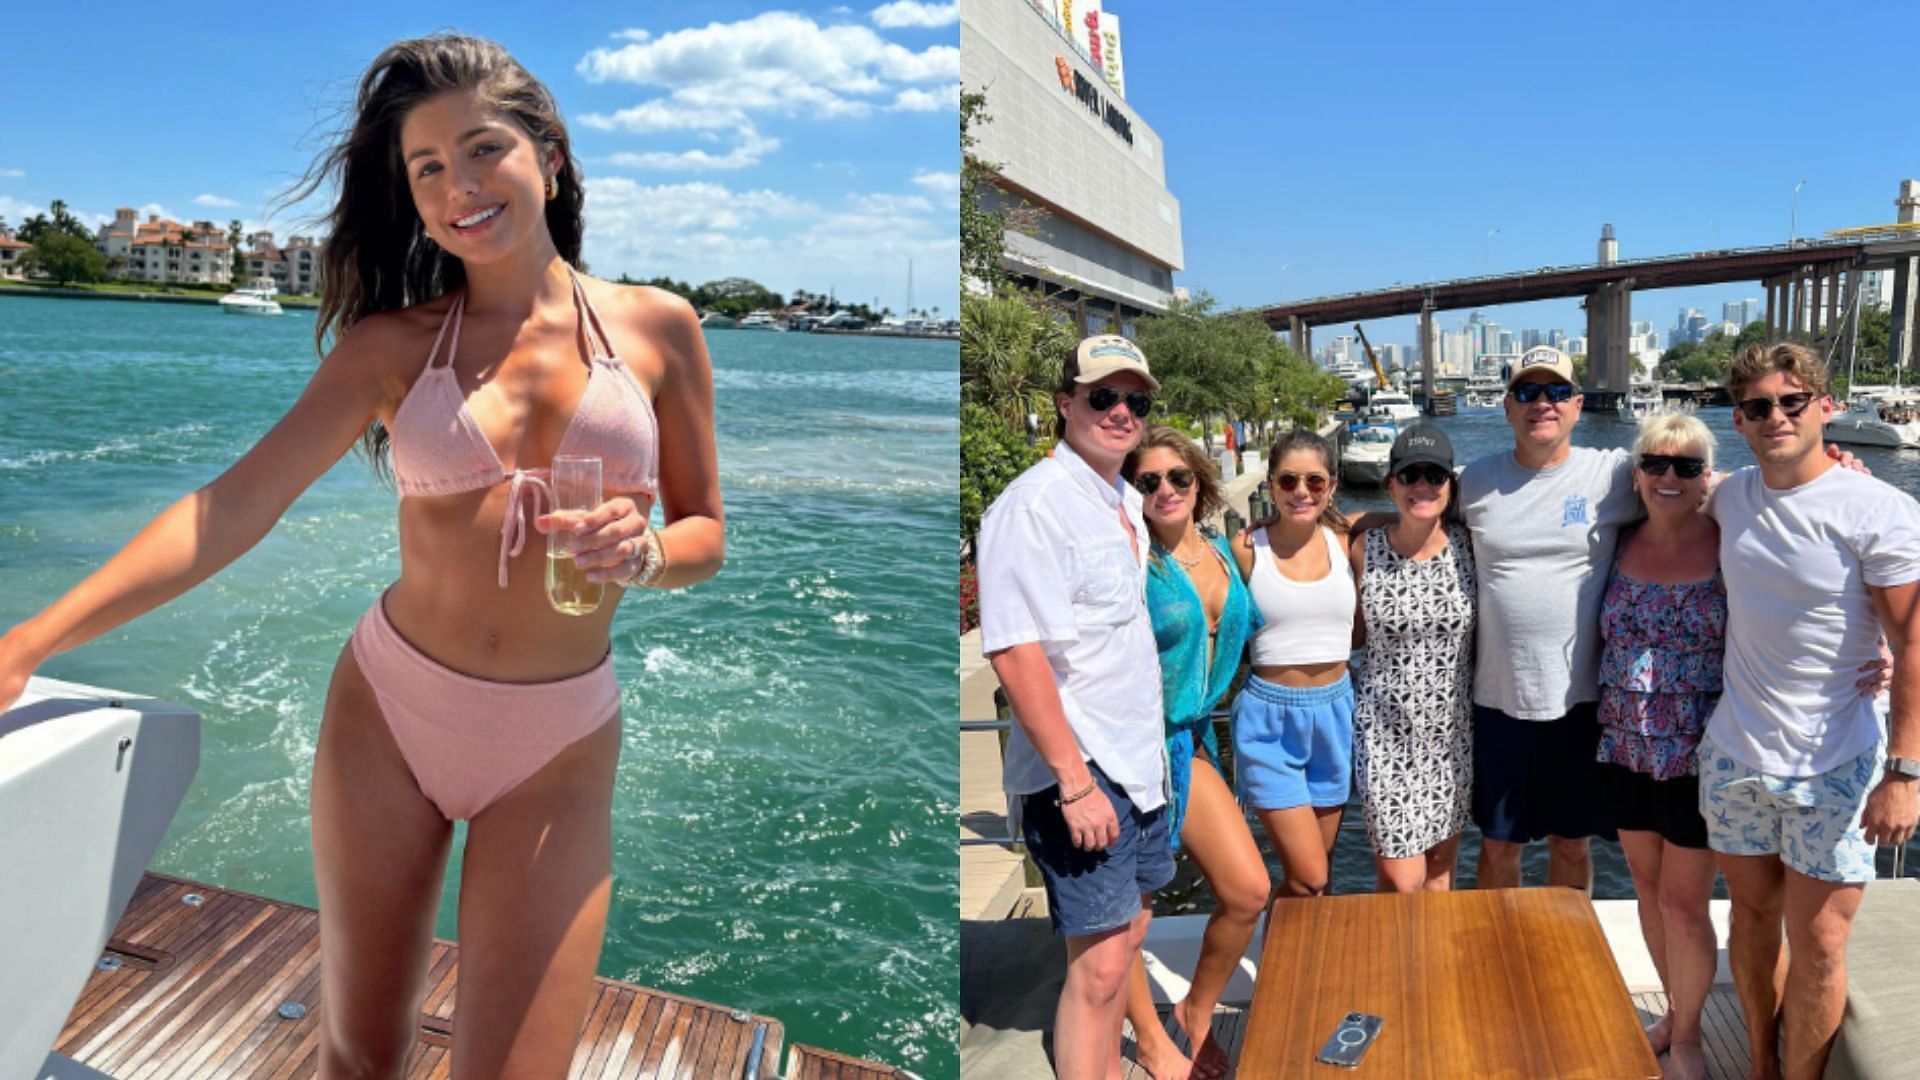 Jake Funk and his fianc&eacute;e spent a day on the boat in Miami.